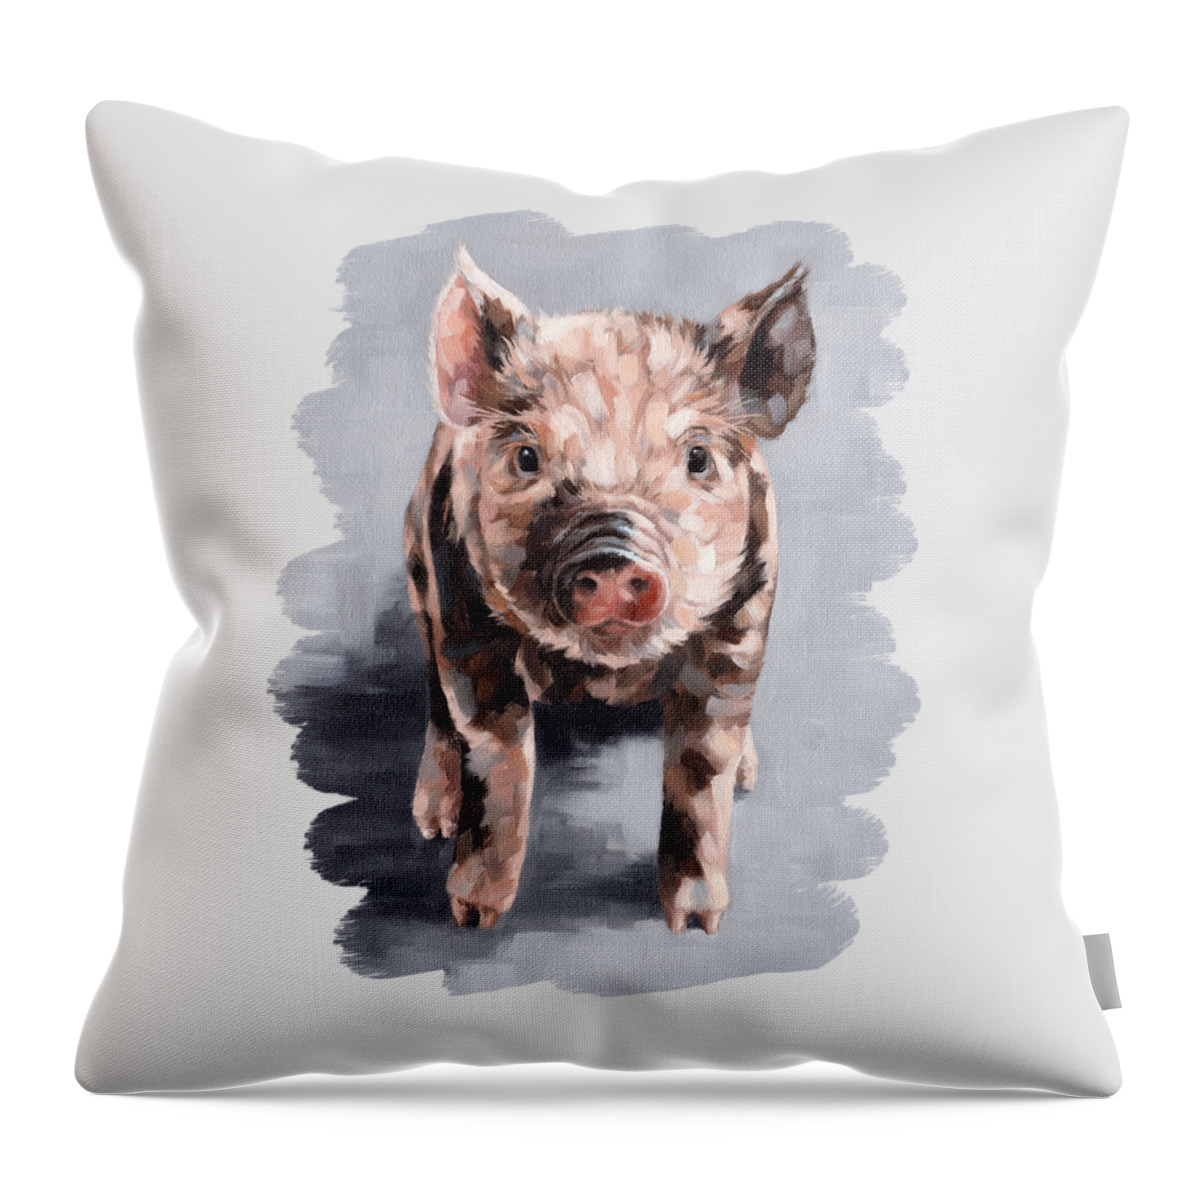 Piglet Throw Pillow featuring the painting Frankie by Rachel Stribbling